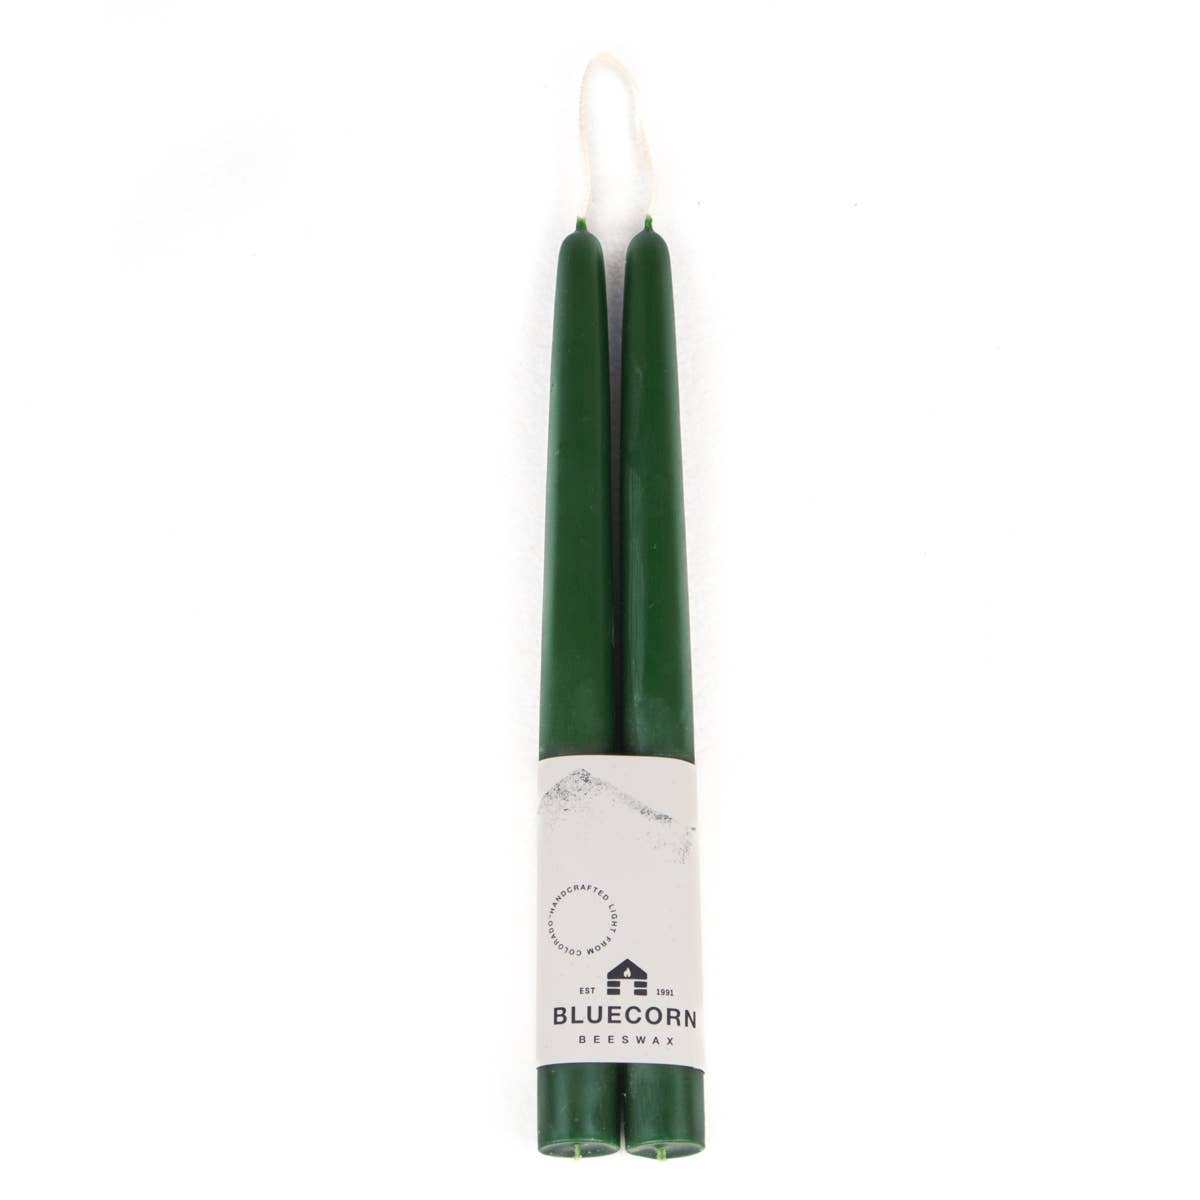 Bluecorn Candles - Pair of Hand-Dipped Beeswax Taper Candles: 8" / Eggplant Bluecorn Candles